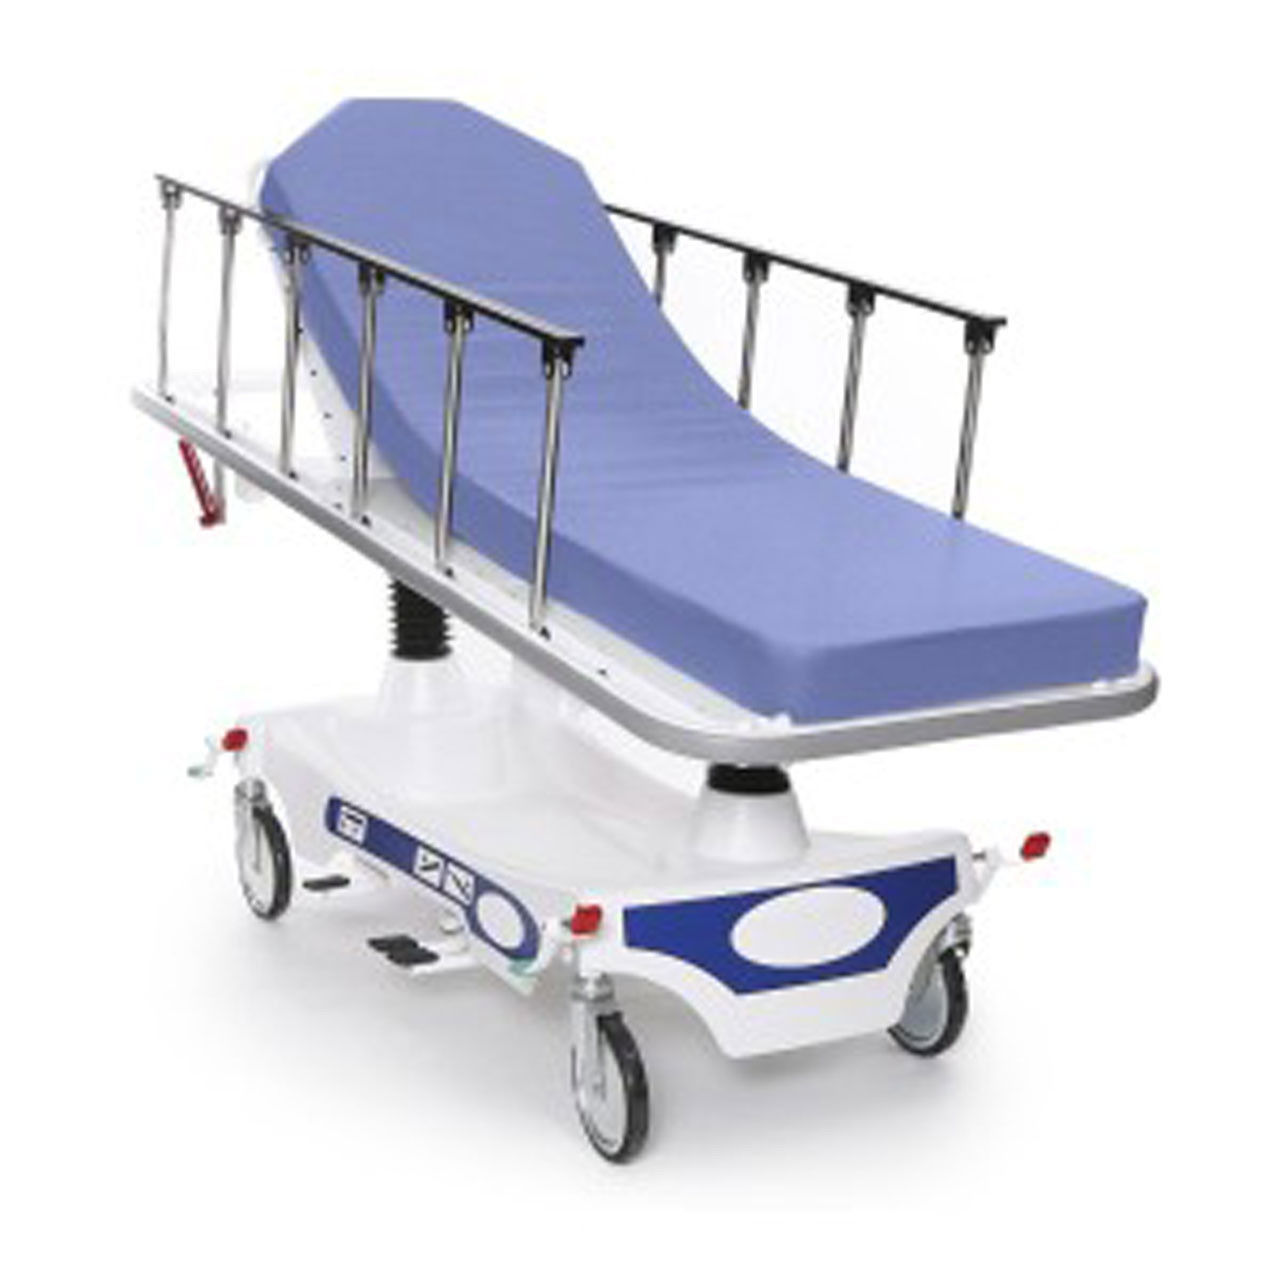 What color choices exist for these stretcher sheets?